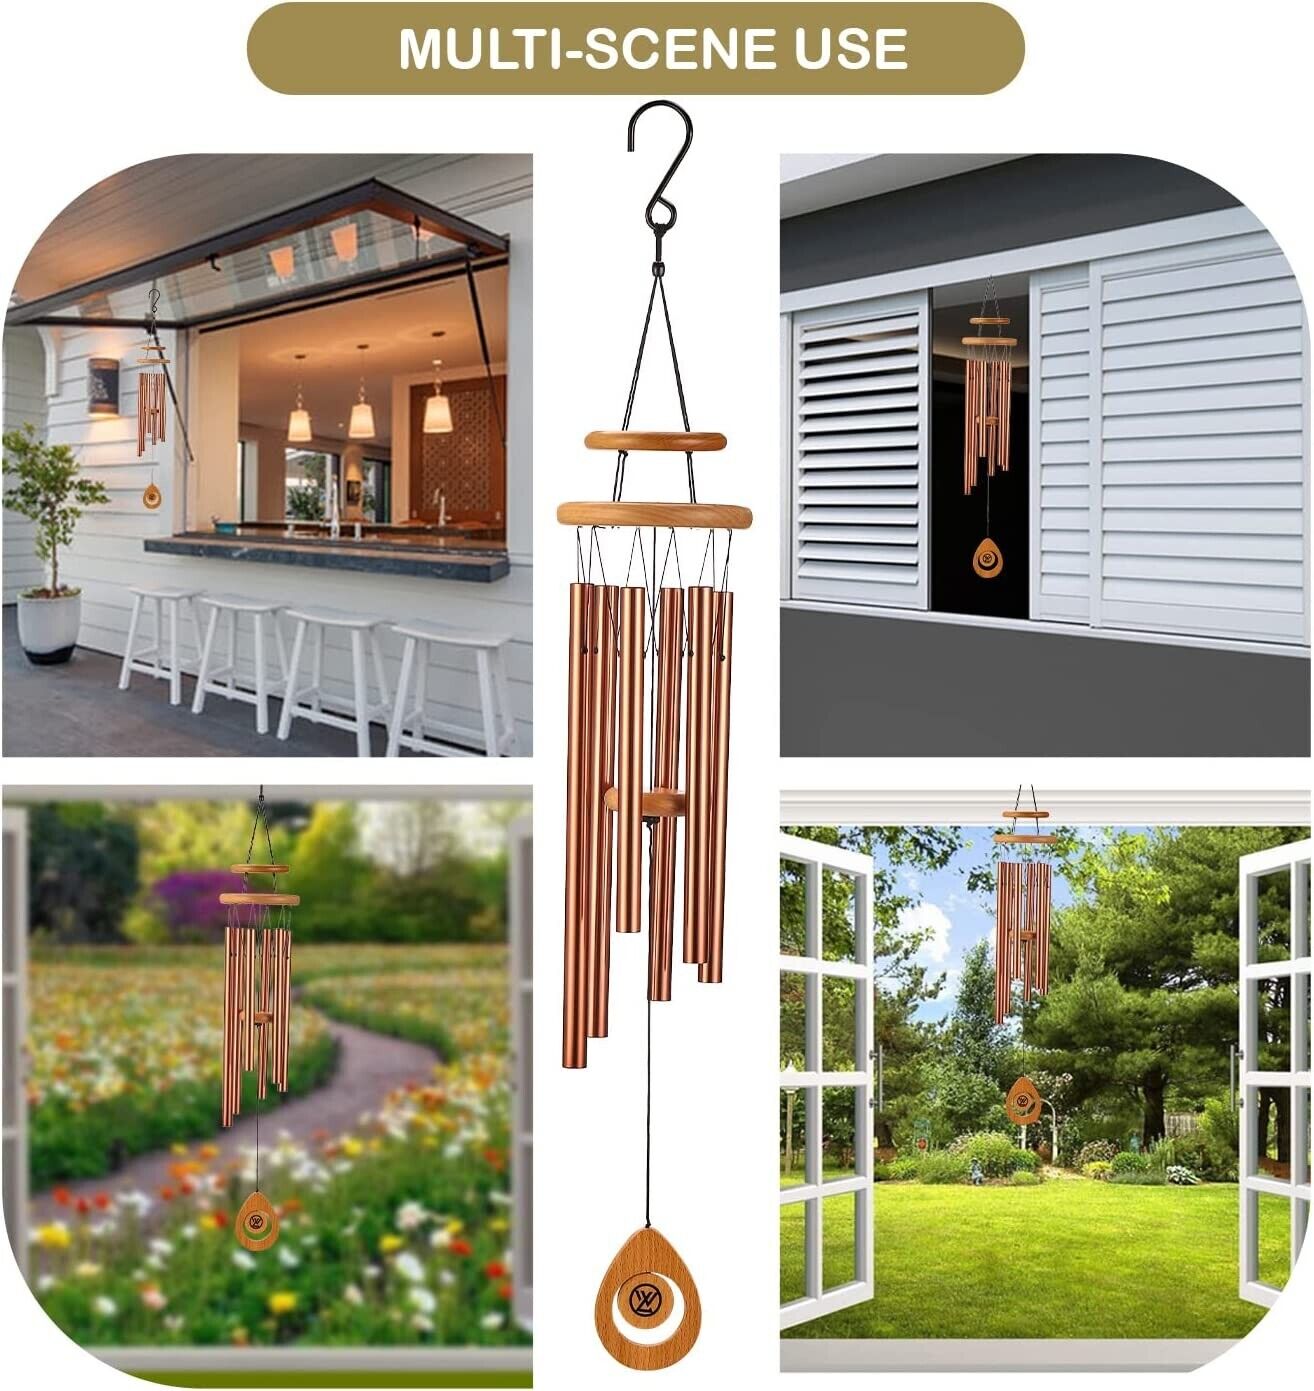 Sympathy Wind Chimes Memorial Condolence Bereavement Gifts Garden Copper Red 38"